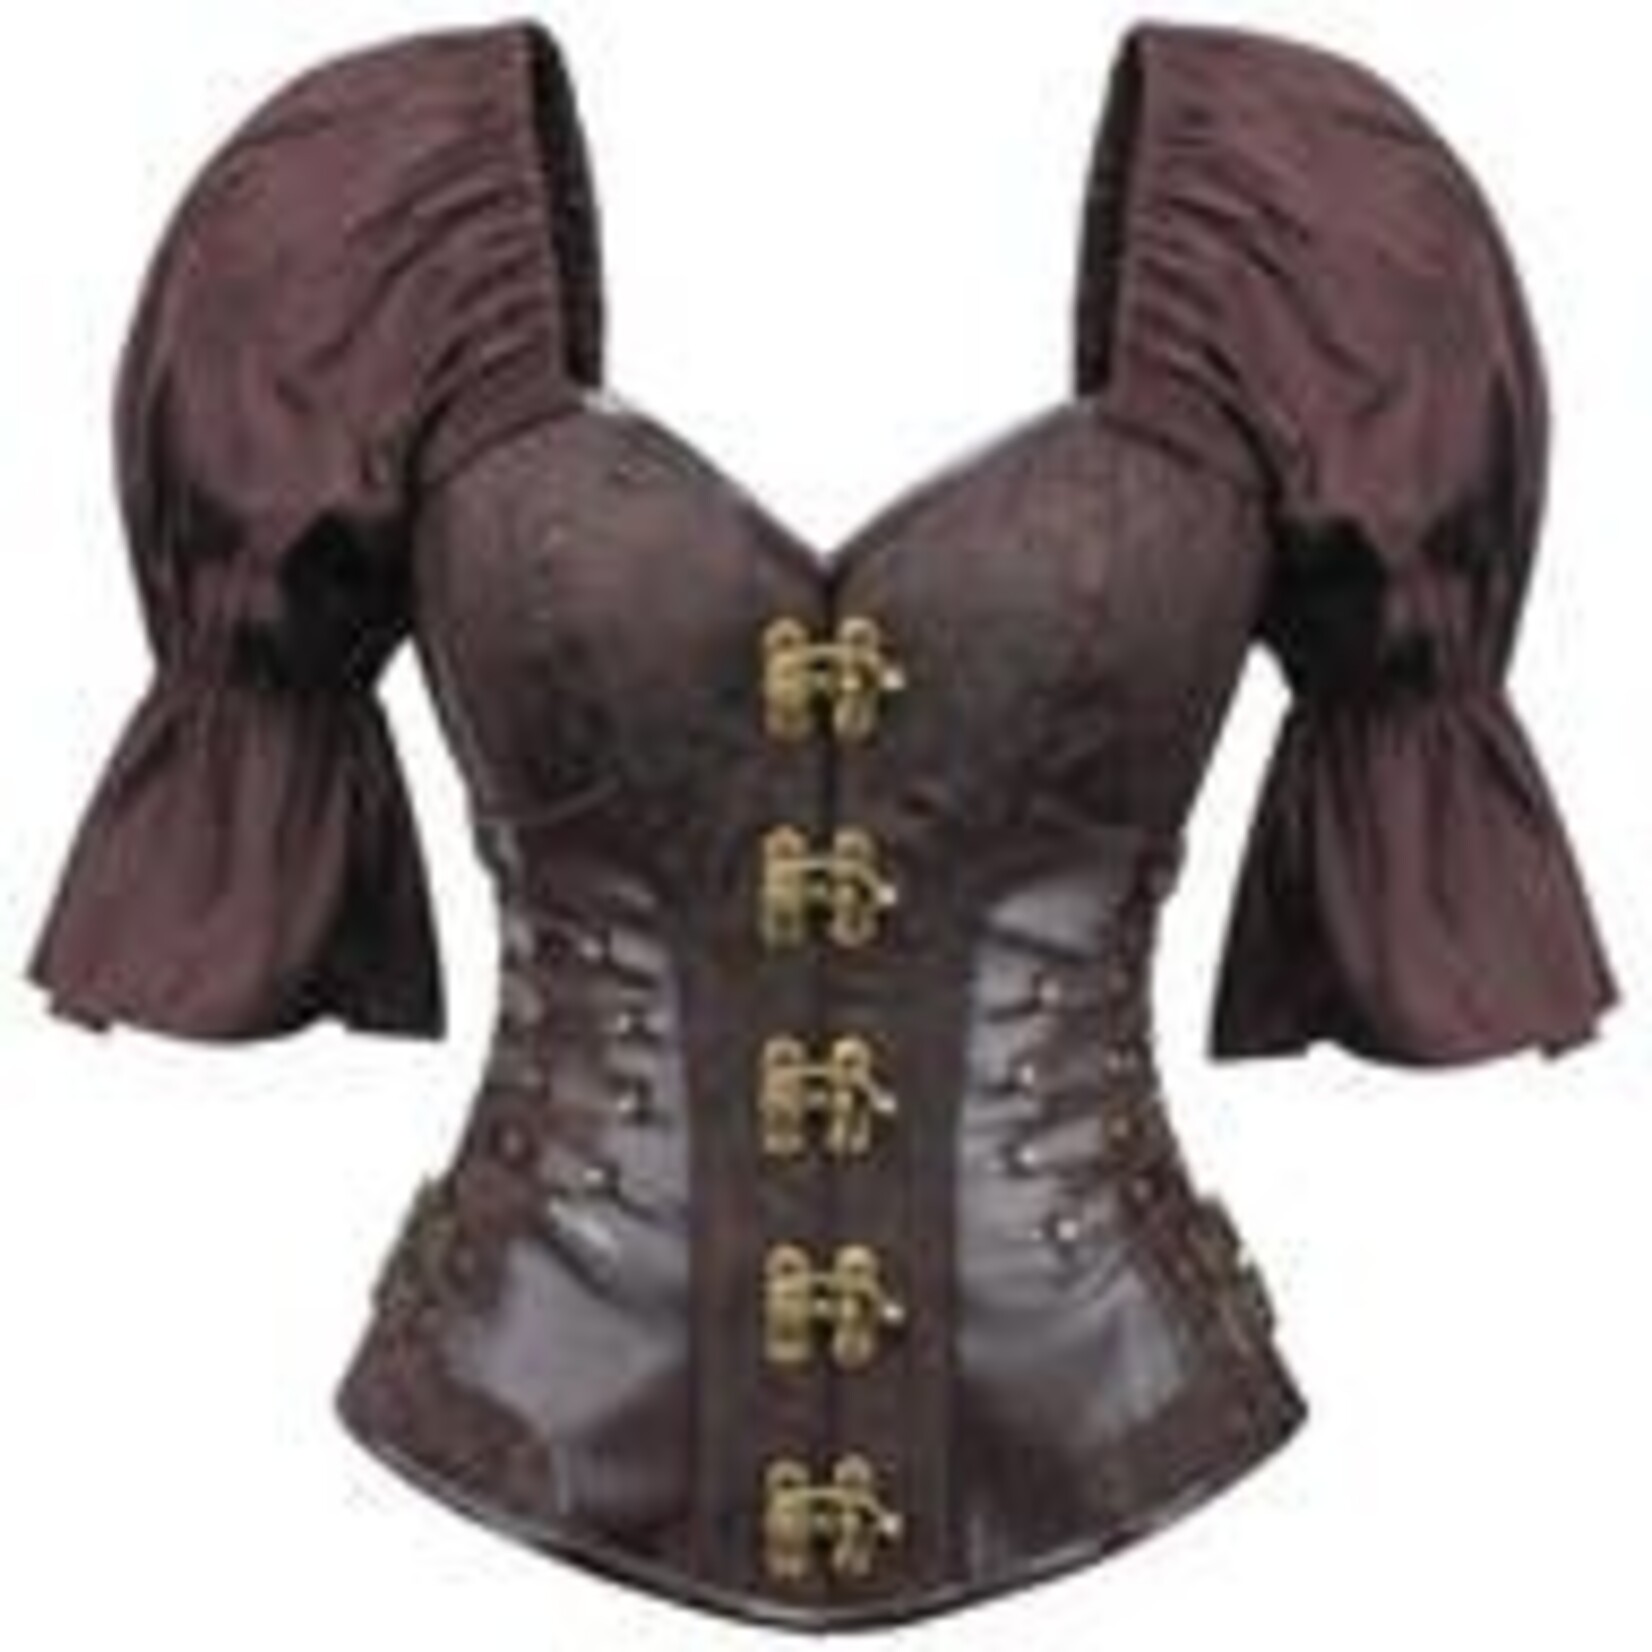 Corset Story Steampunk Inspired Overbust with Short Flounce Sleeve